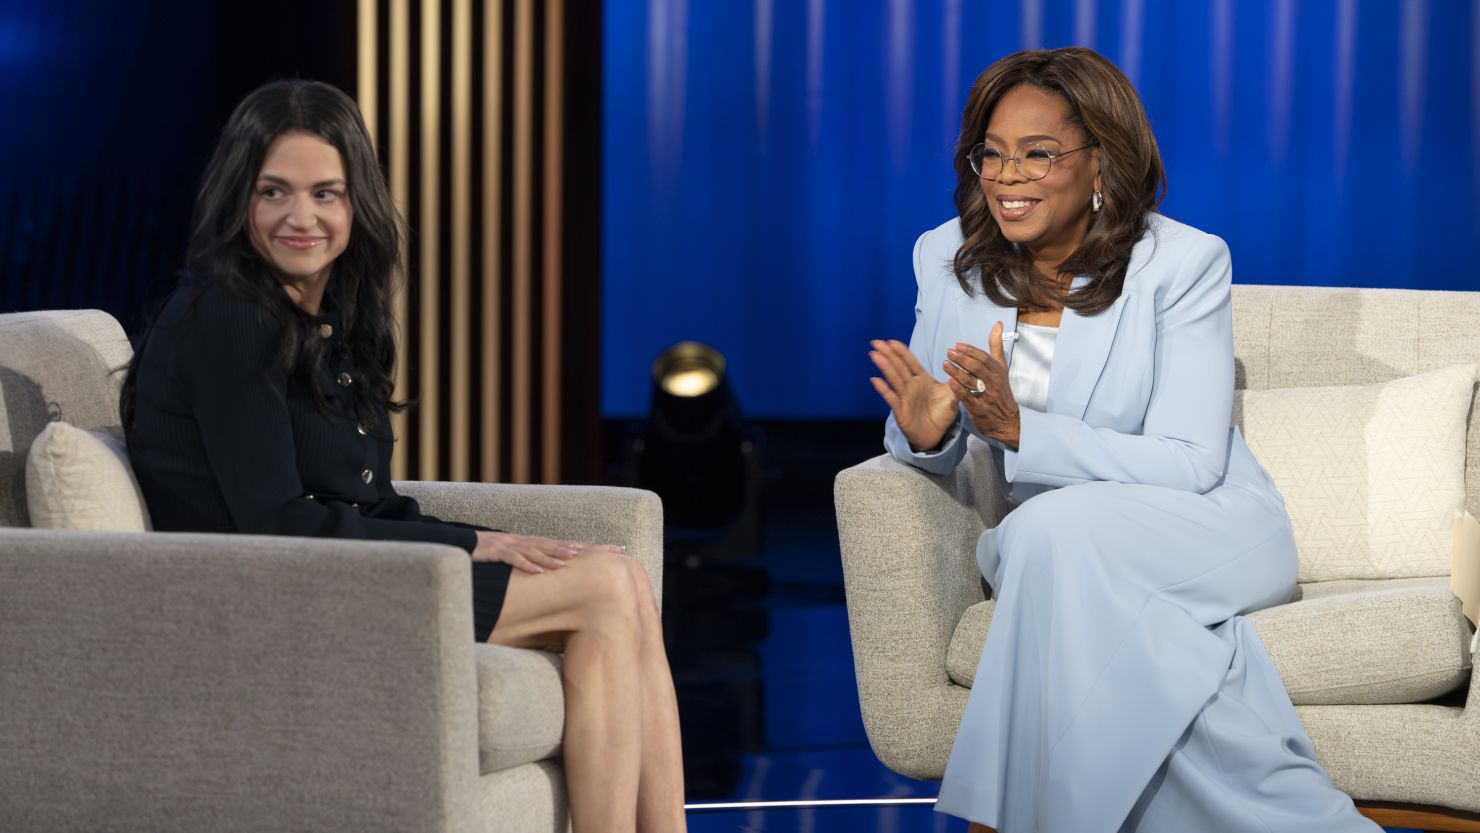 Oprah Winfrey tears up recounting her weight loss journey in